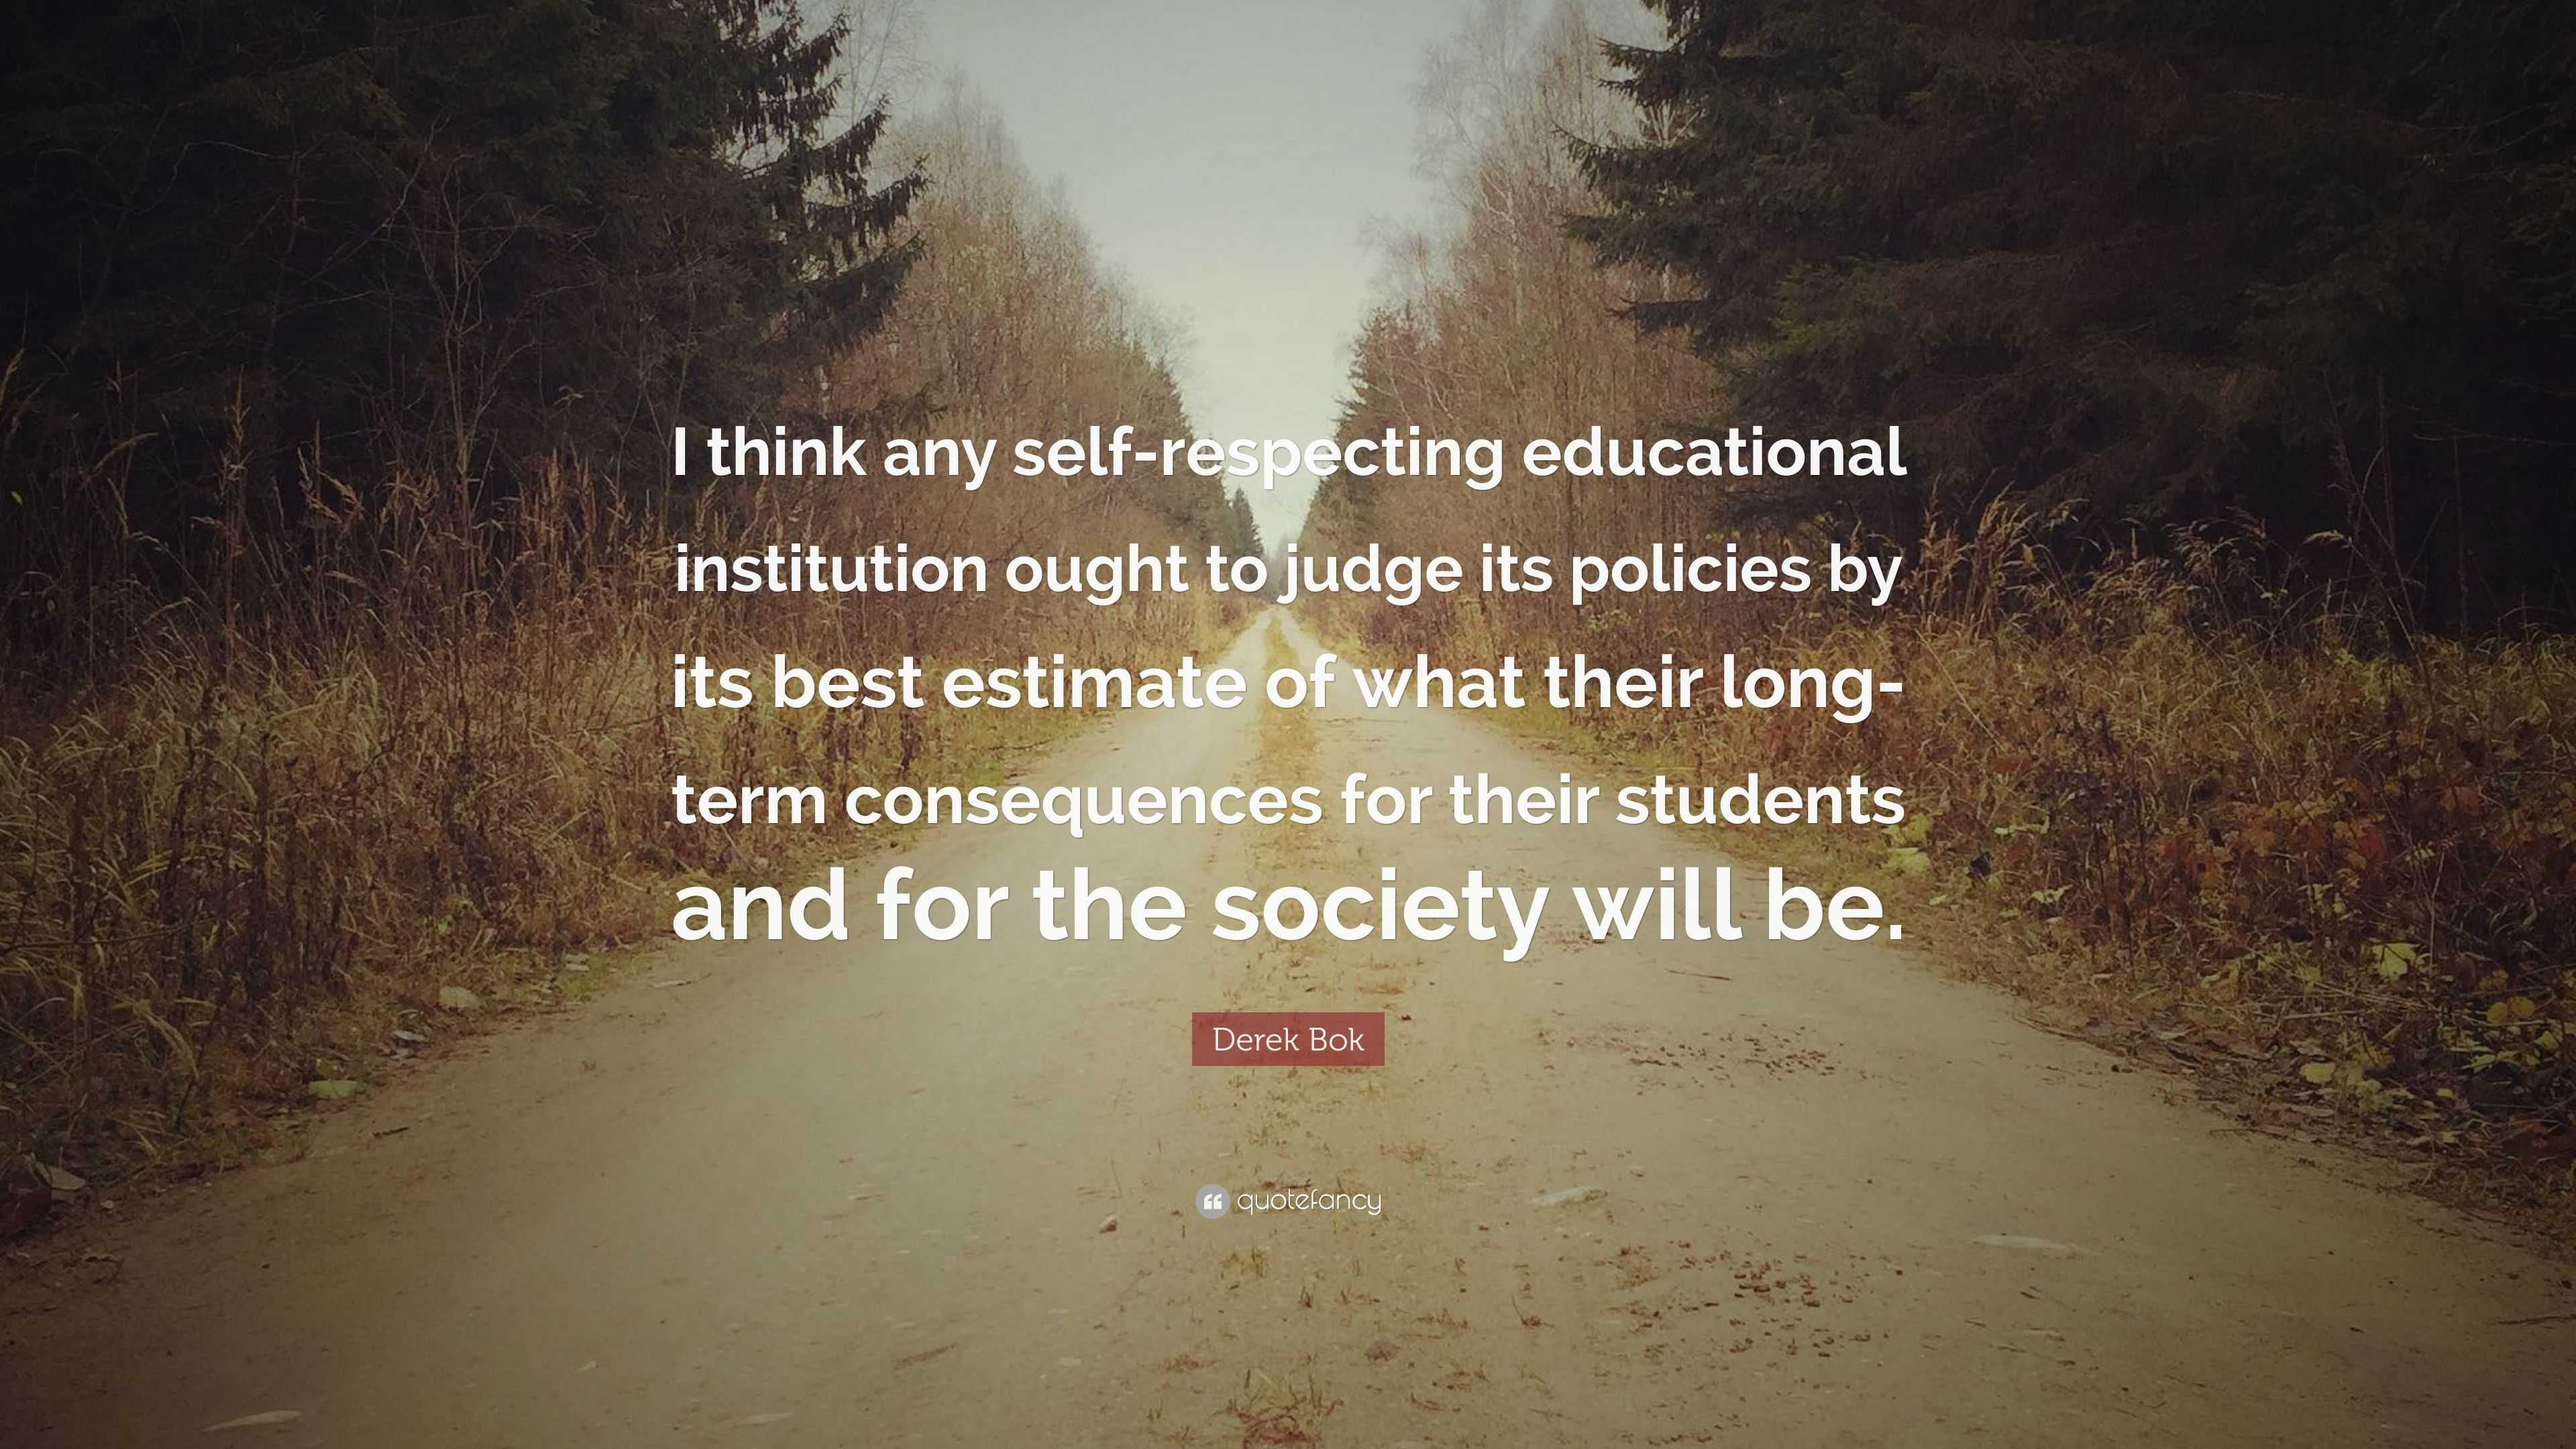 Derek Bok Quote: “I think any self-respecting educational institution ...